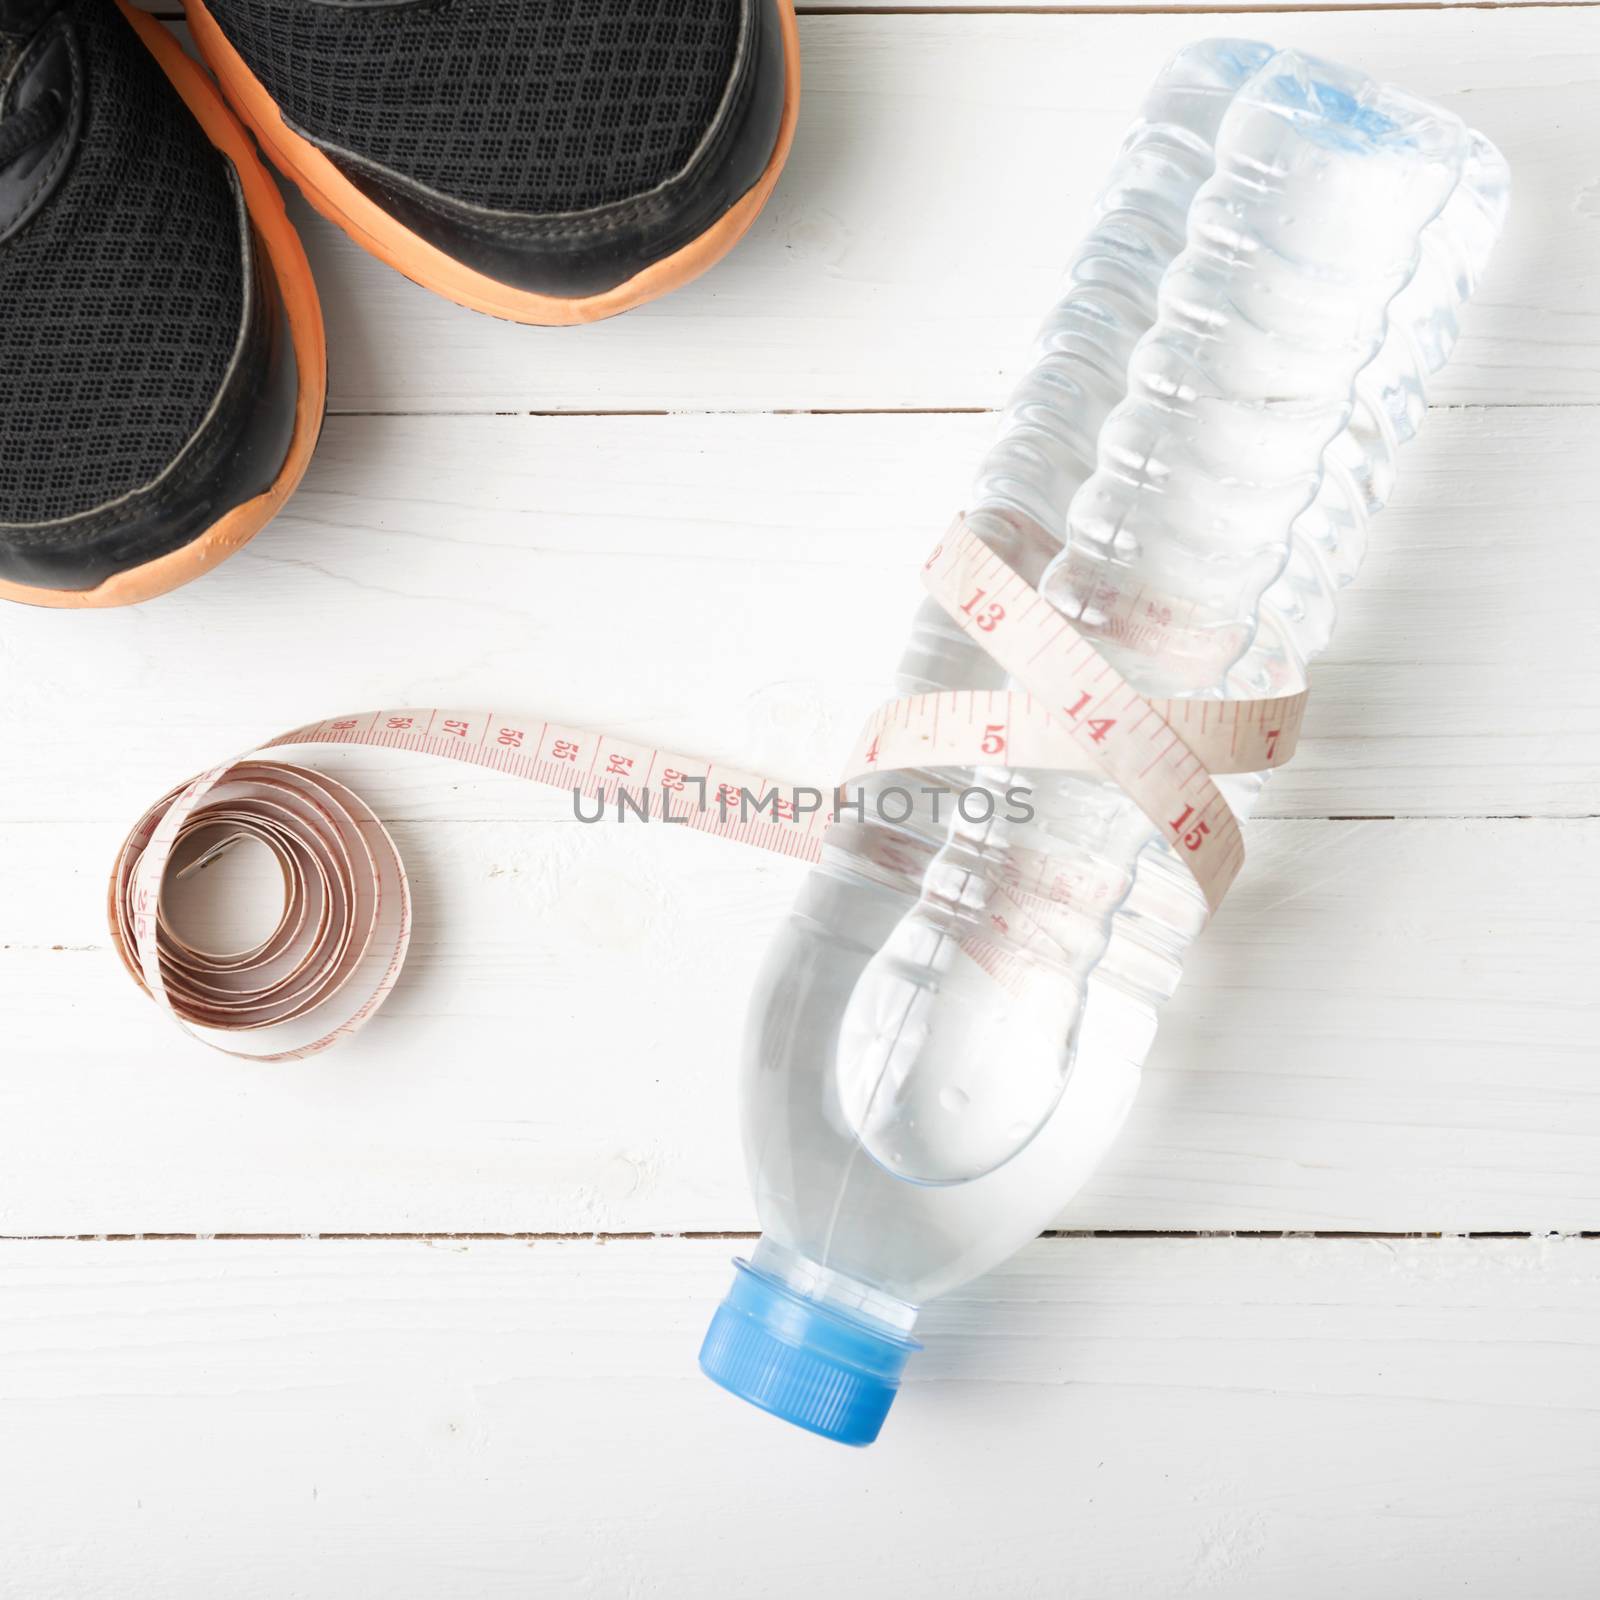 fitness equipment : running shoes,drinking water and measuring tape on white wood table